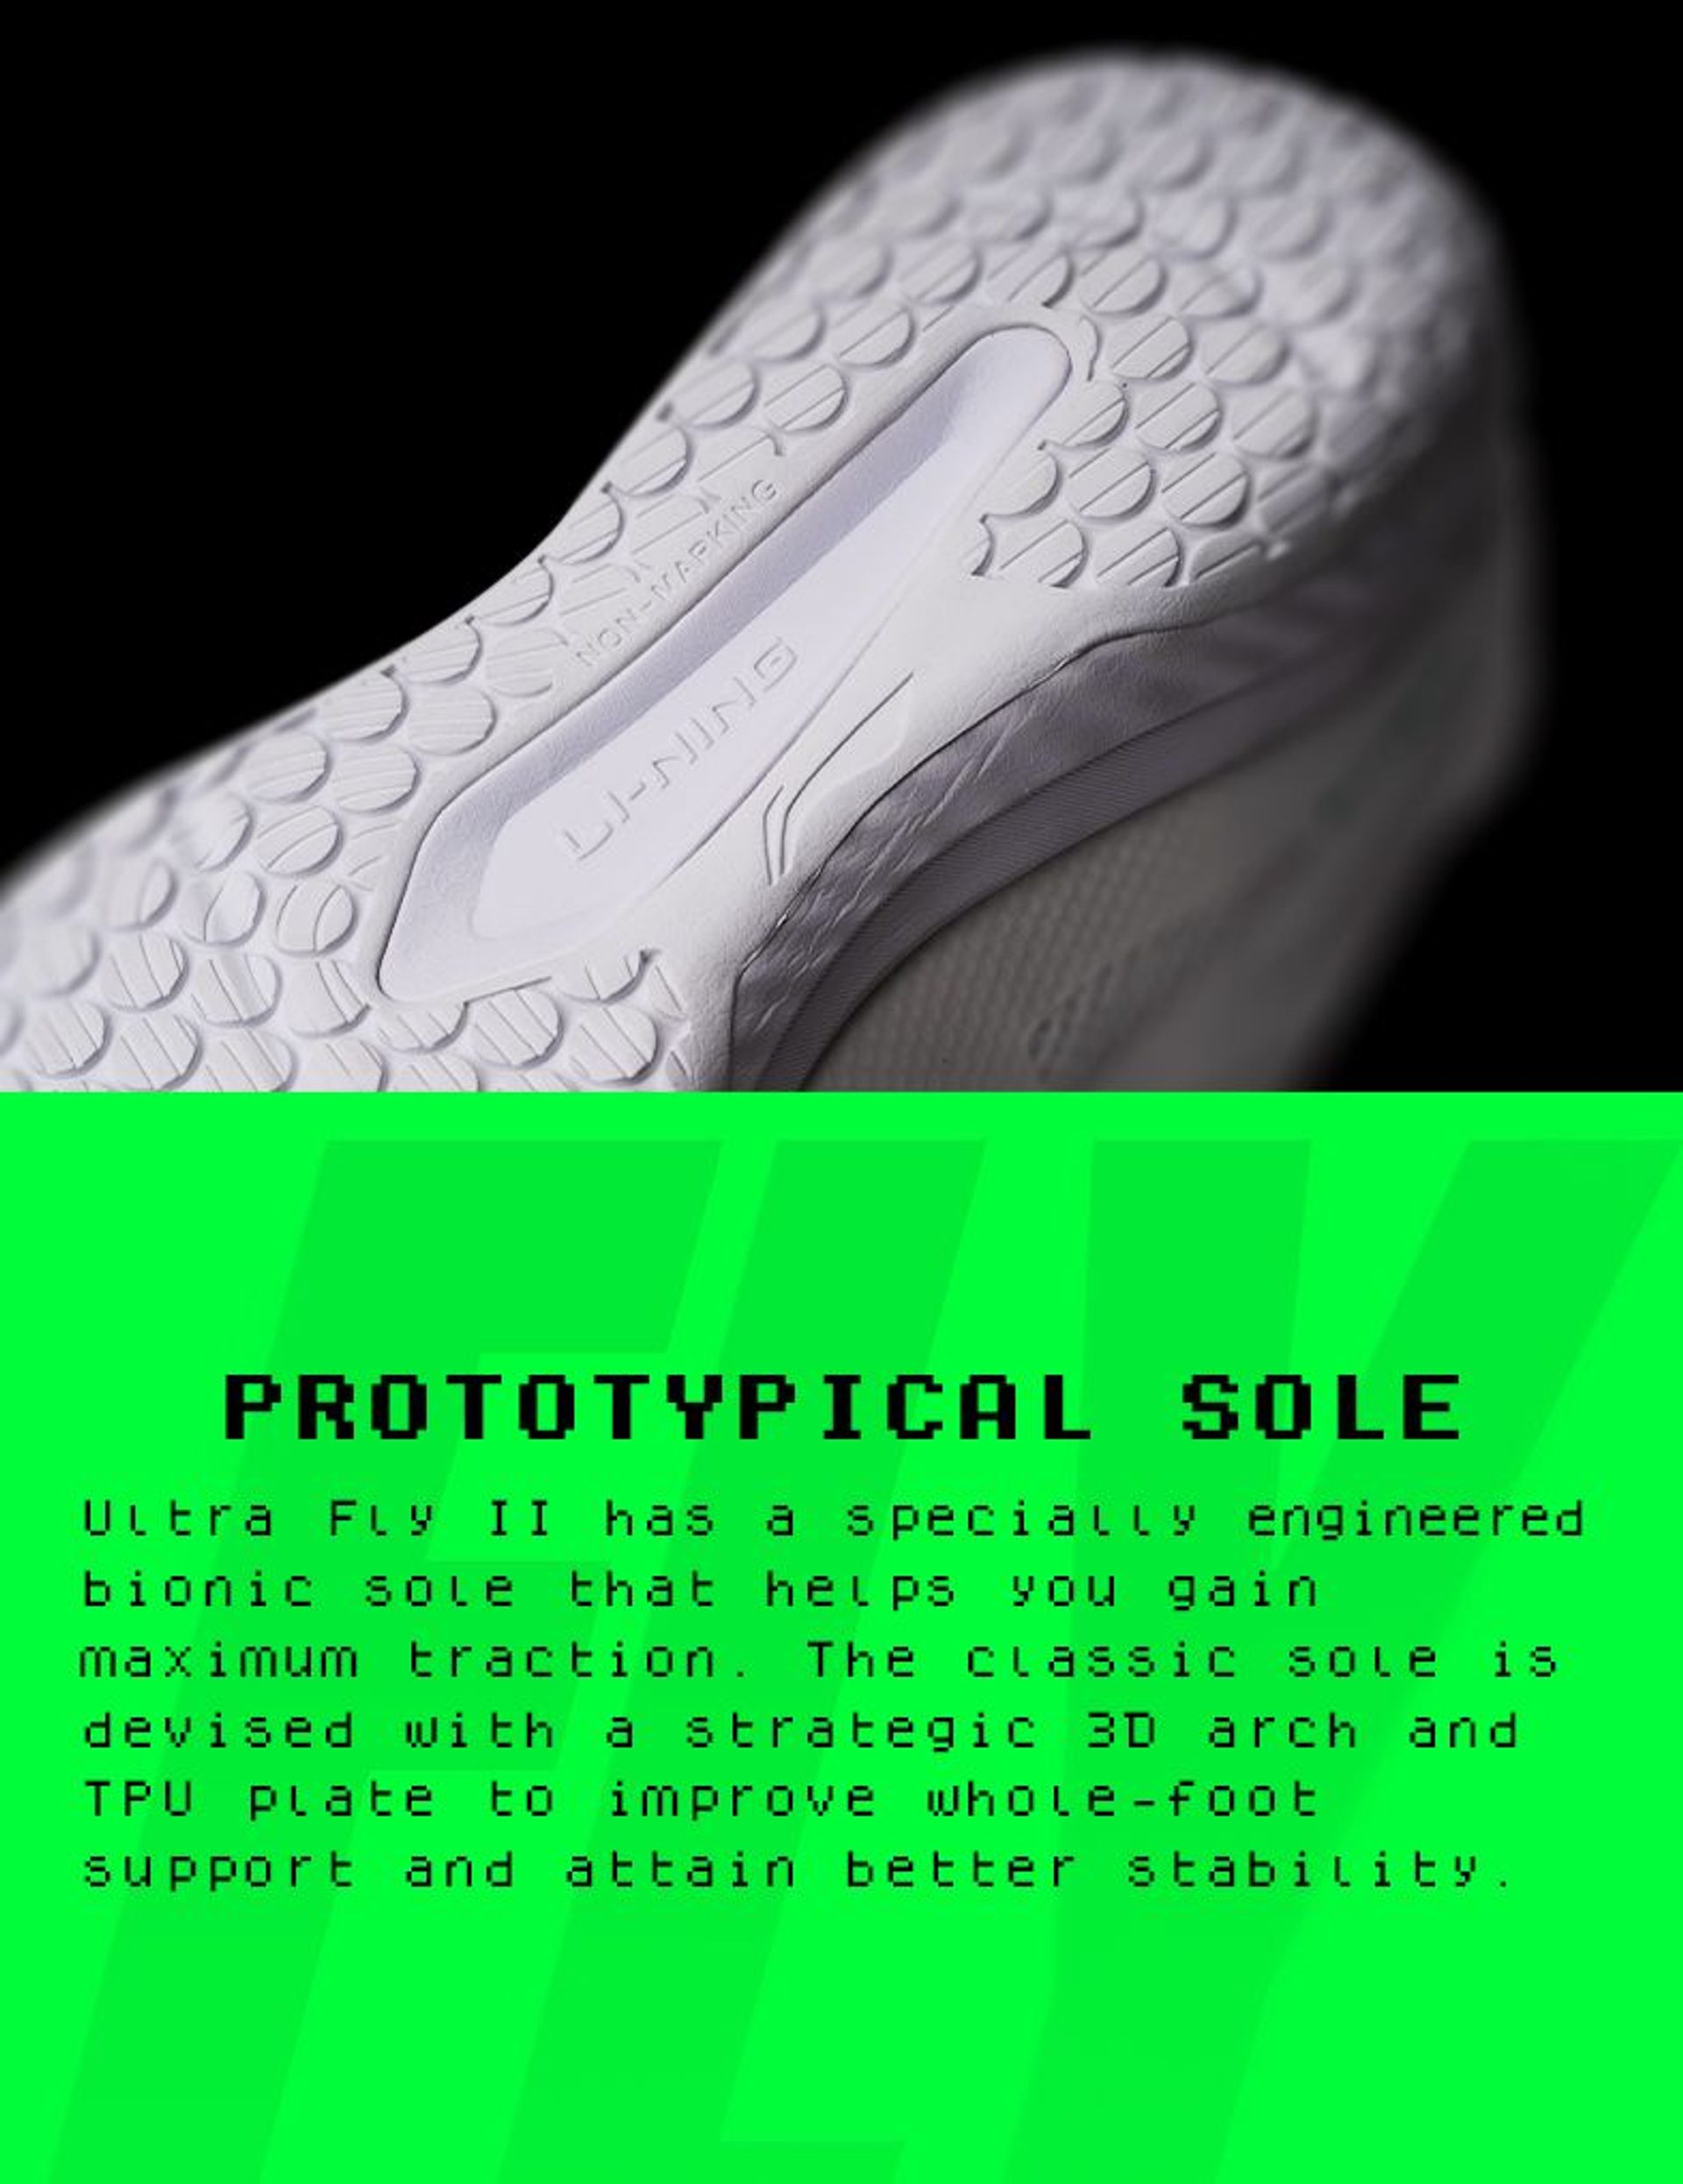 Ultra Fly II - Prototypical Sole